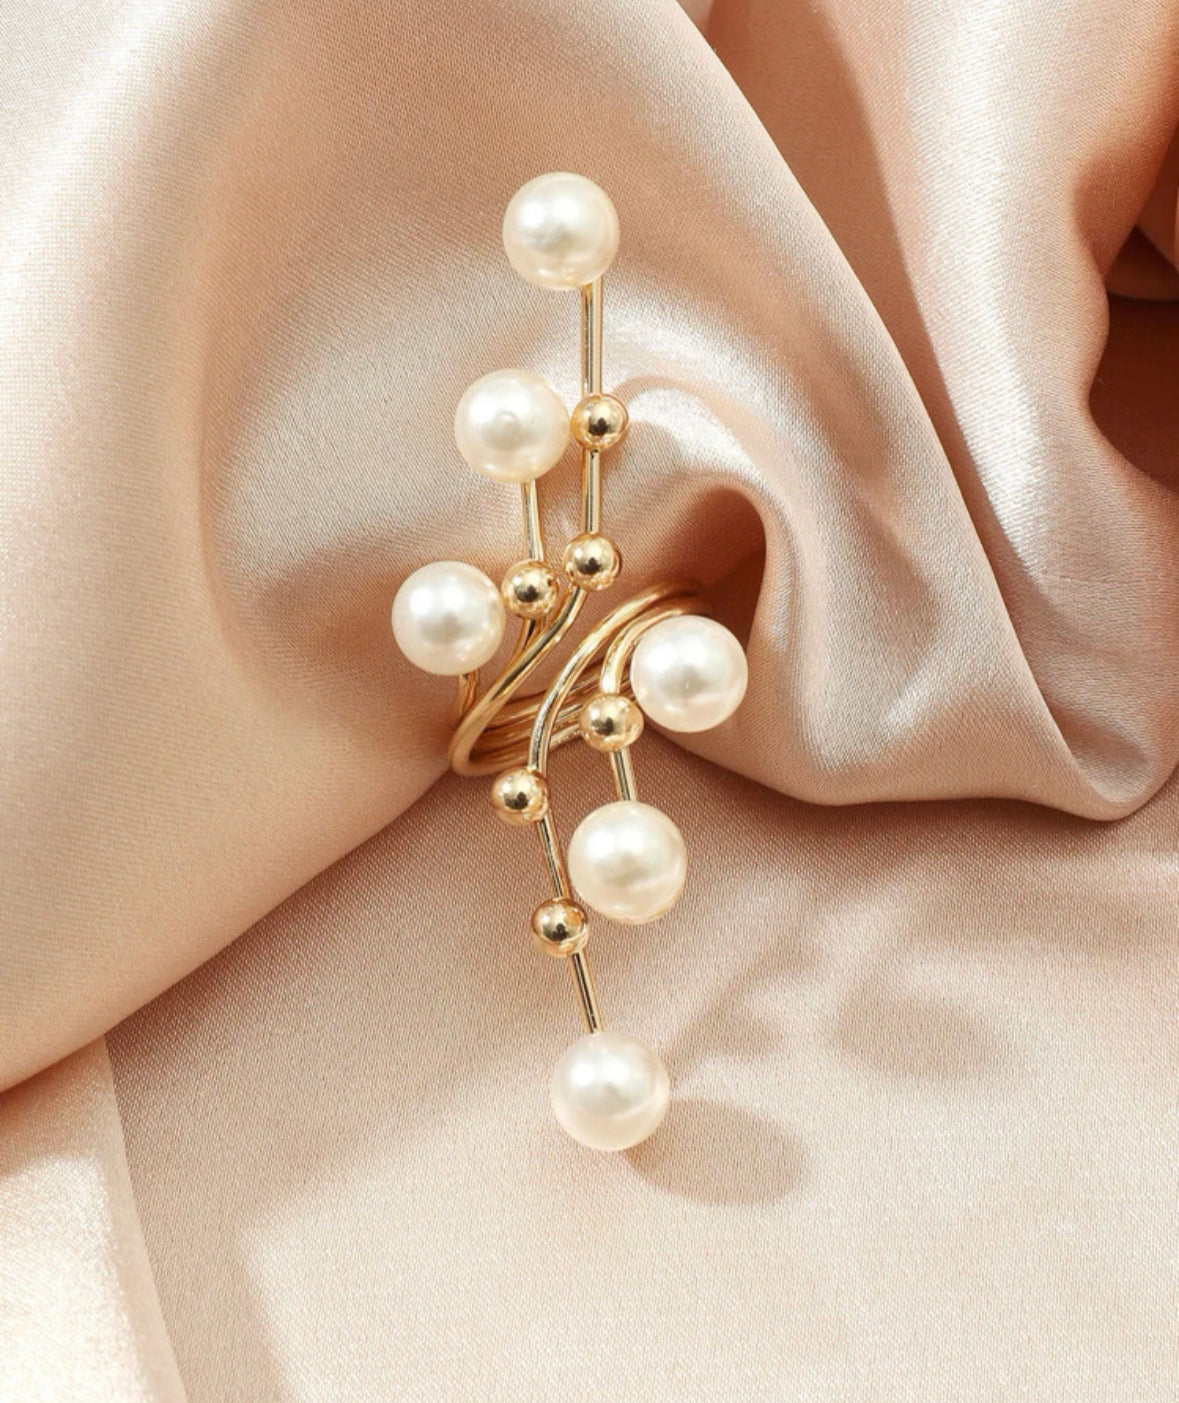 Pearl ring, Freshwater round pearl, Genuine pearl.